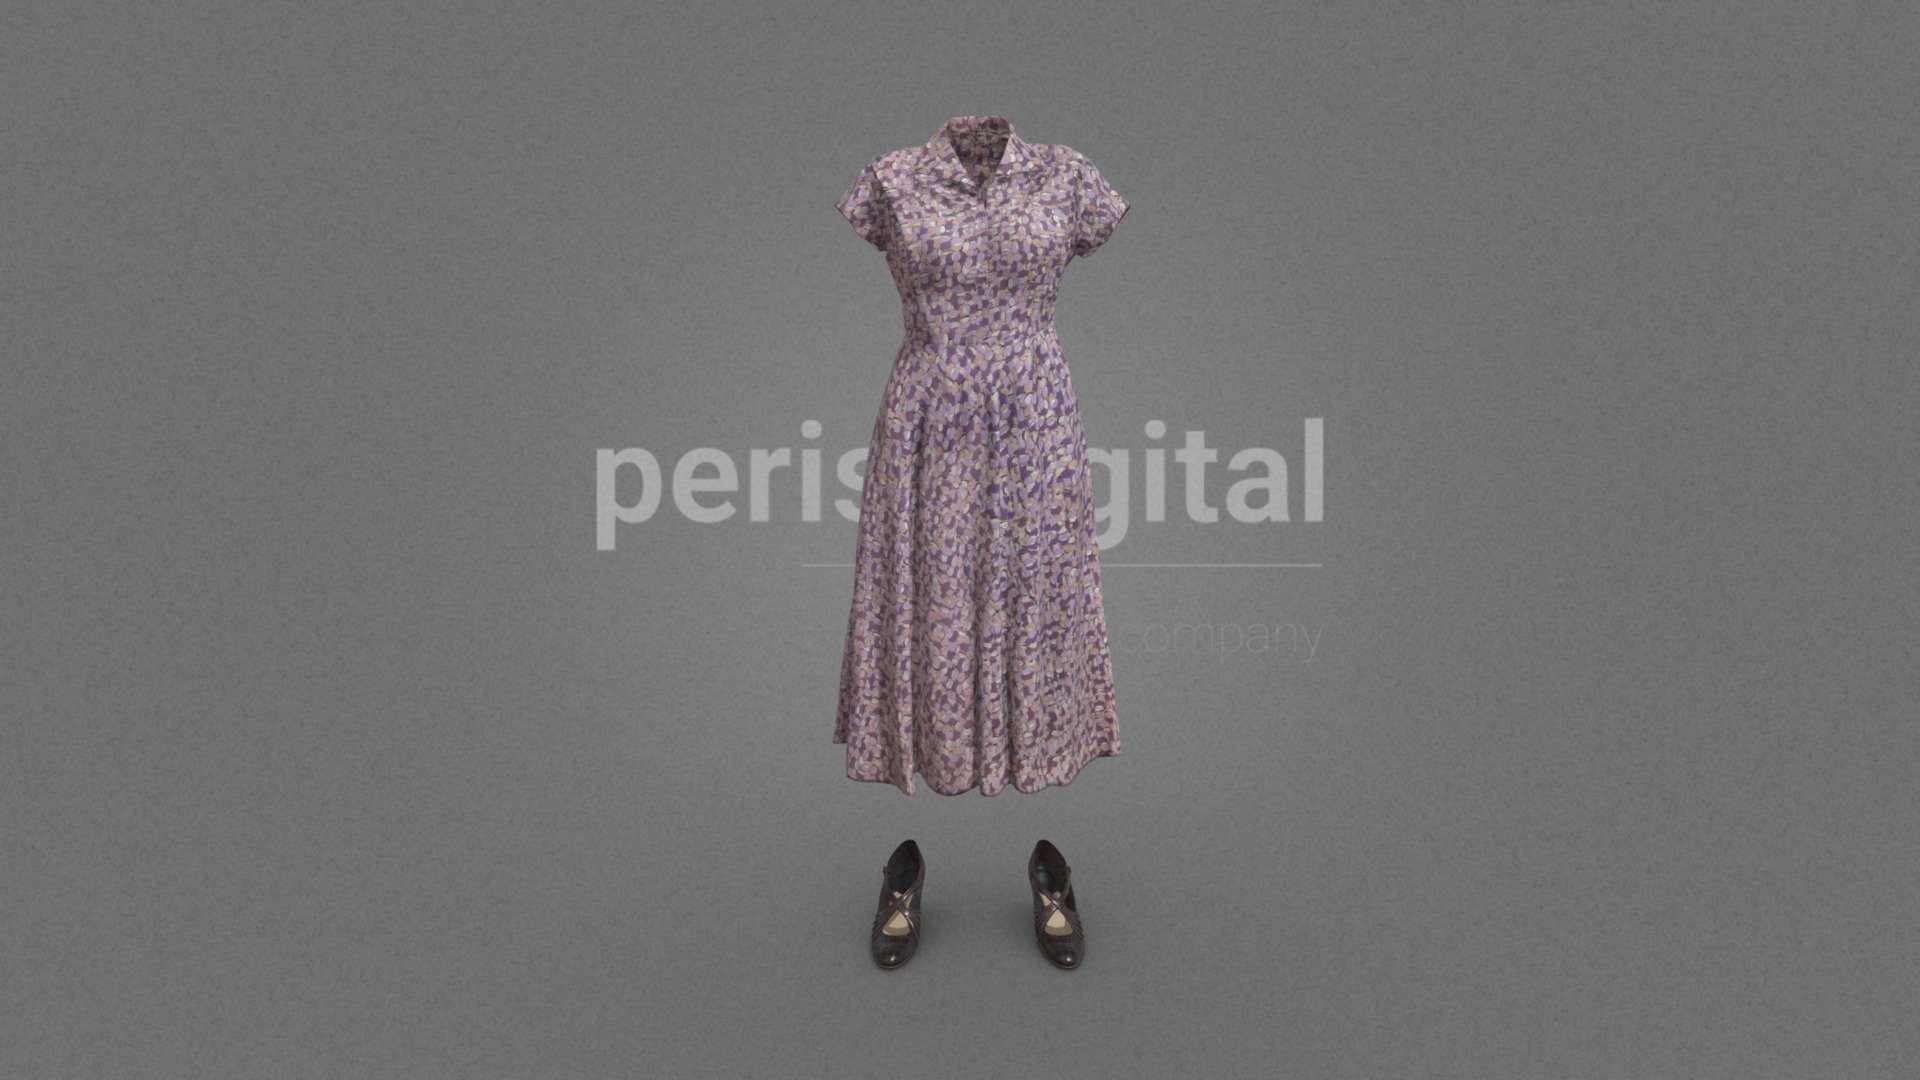 Shirt dress printed in purple tones, short sleeves; brown leather heeled shoes with cross straps.

Our &ldquo;40s